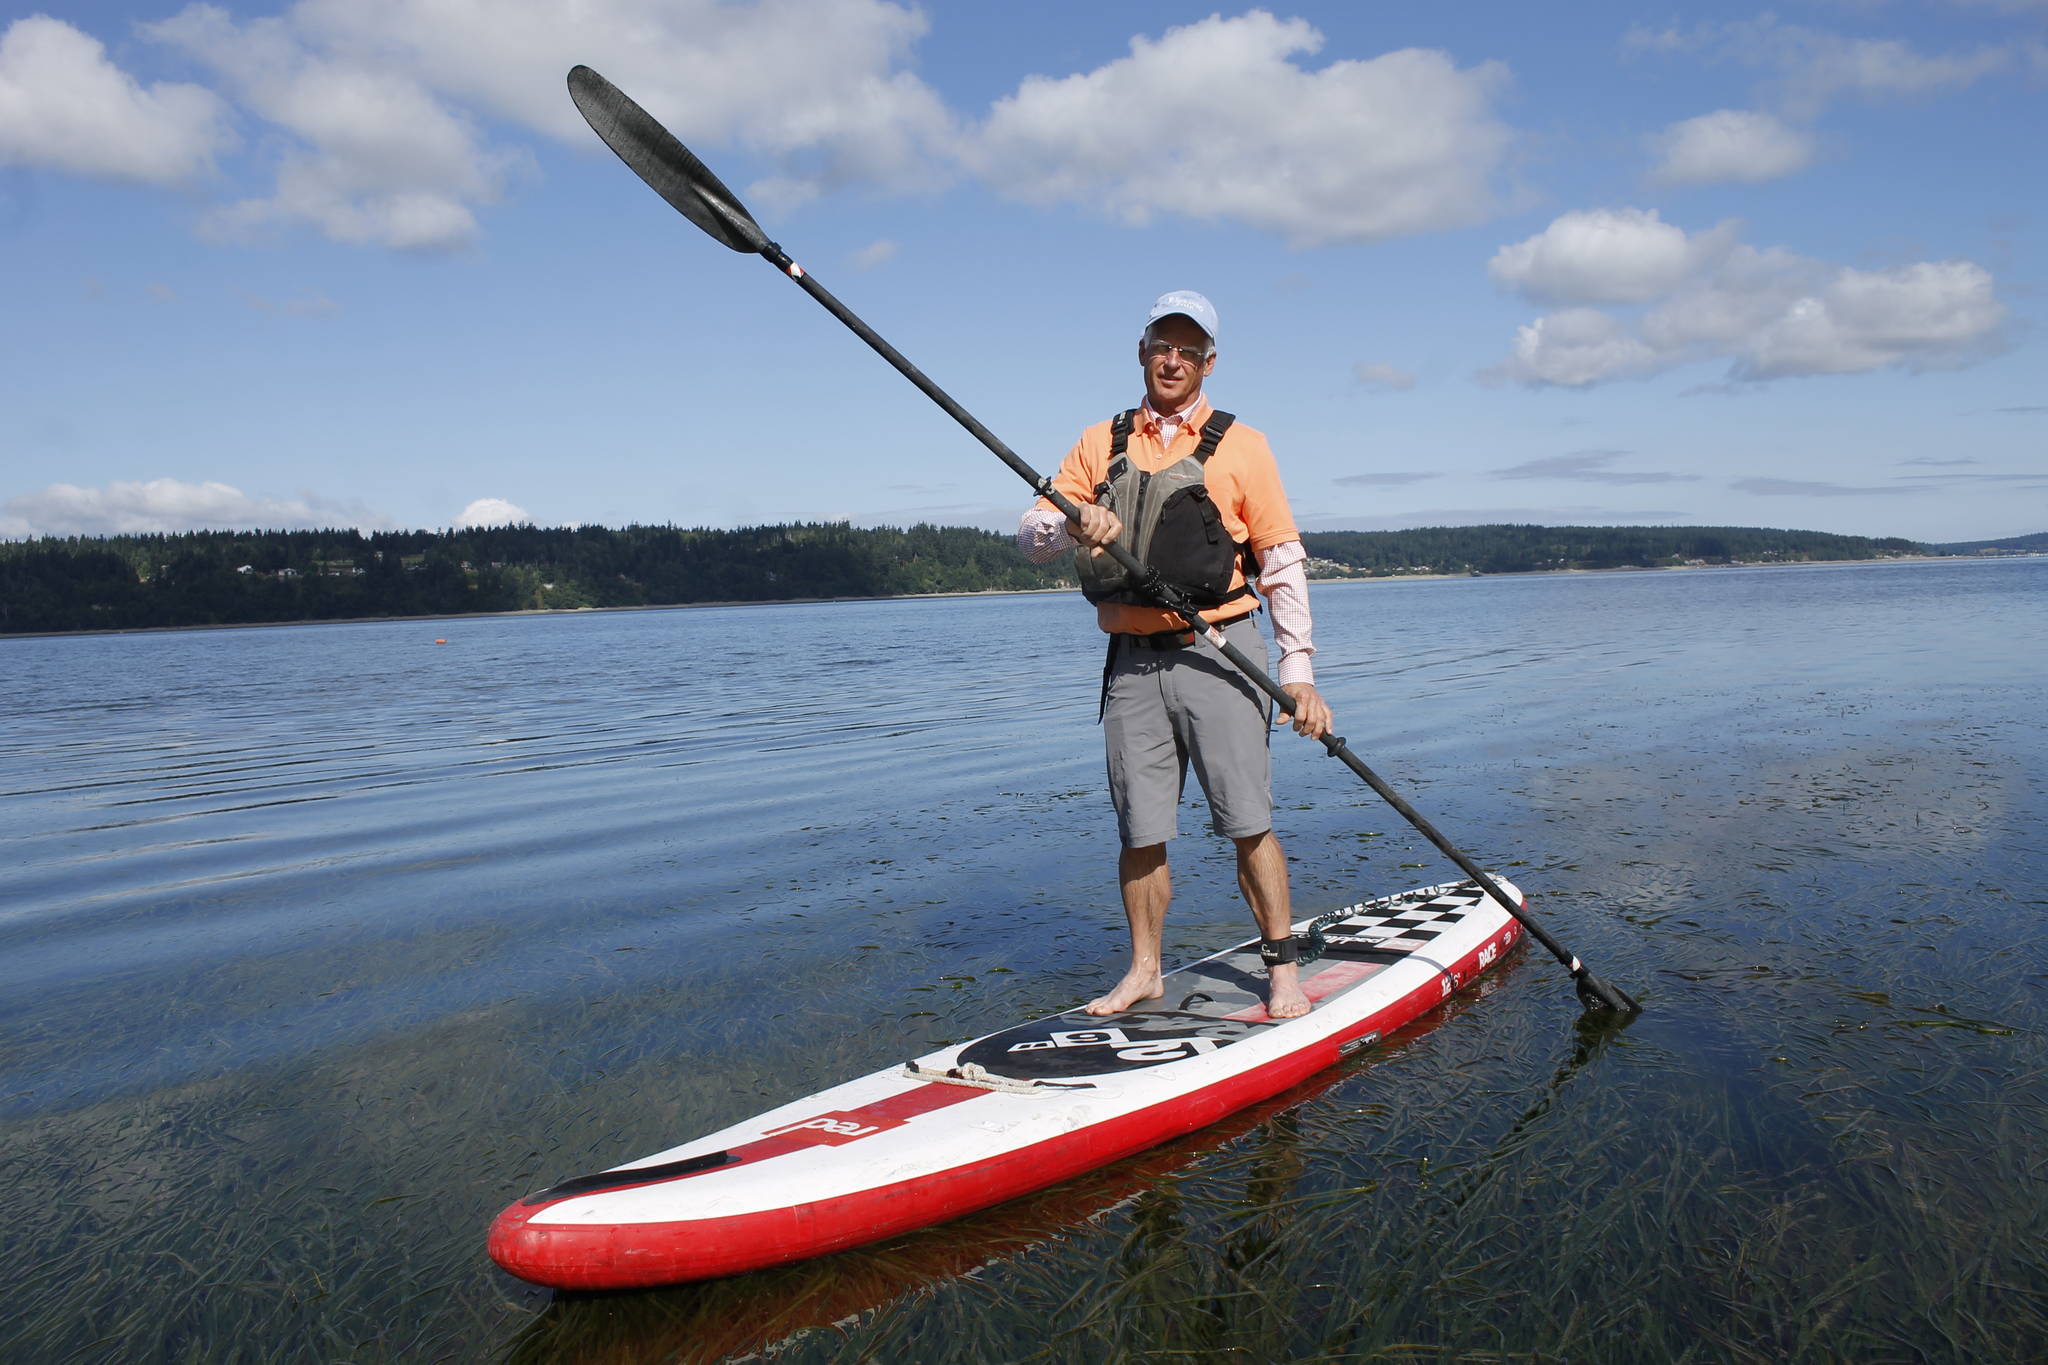 Freeland resident Kevin Lungren has been commuting to the office using his paddleboard. It’s a commute he can do in all seasons and just about any type of weather, except wind. (Photo by Kira Erickson/South Whidbey Record)